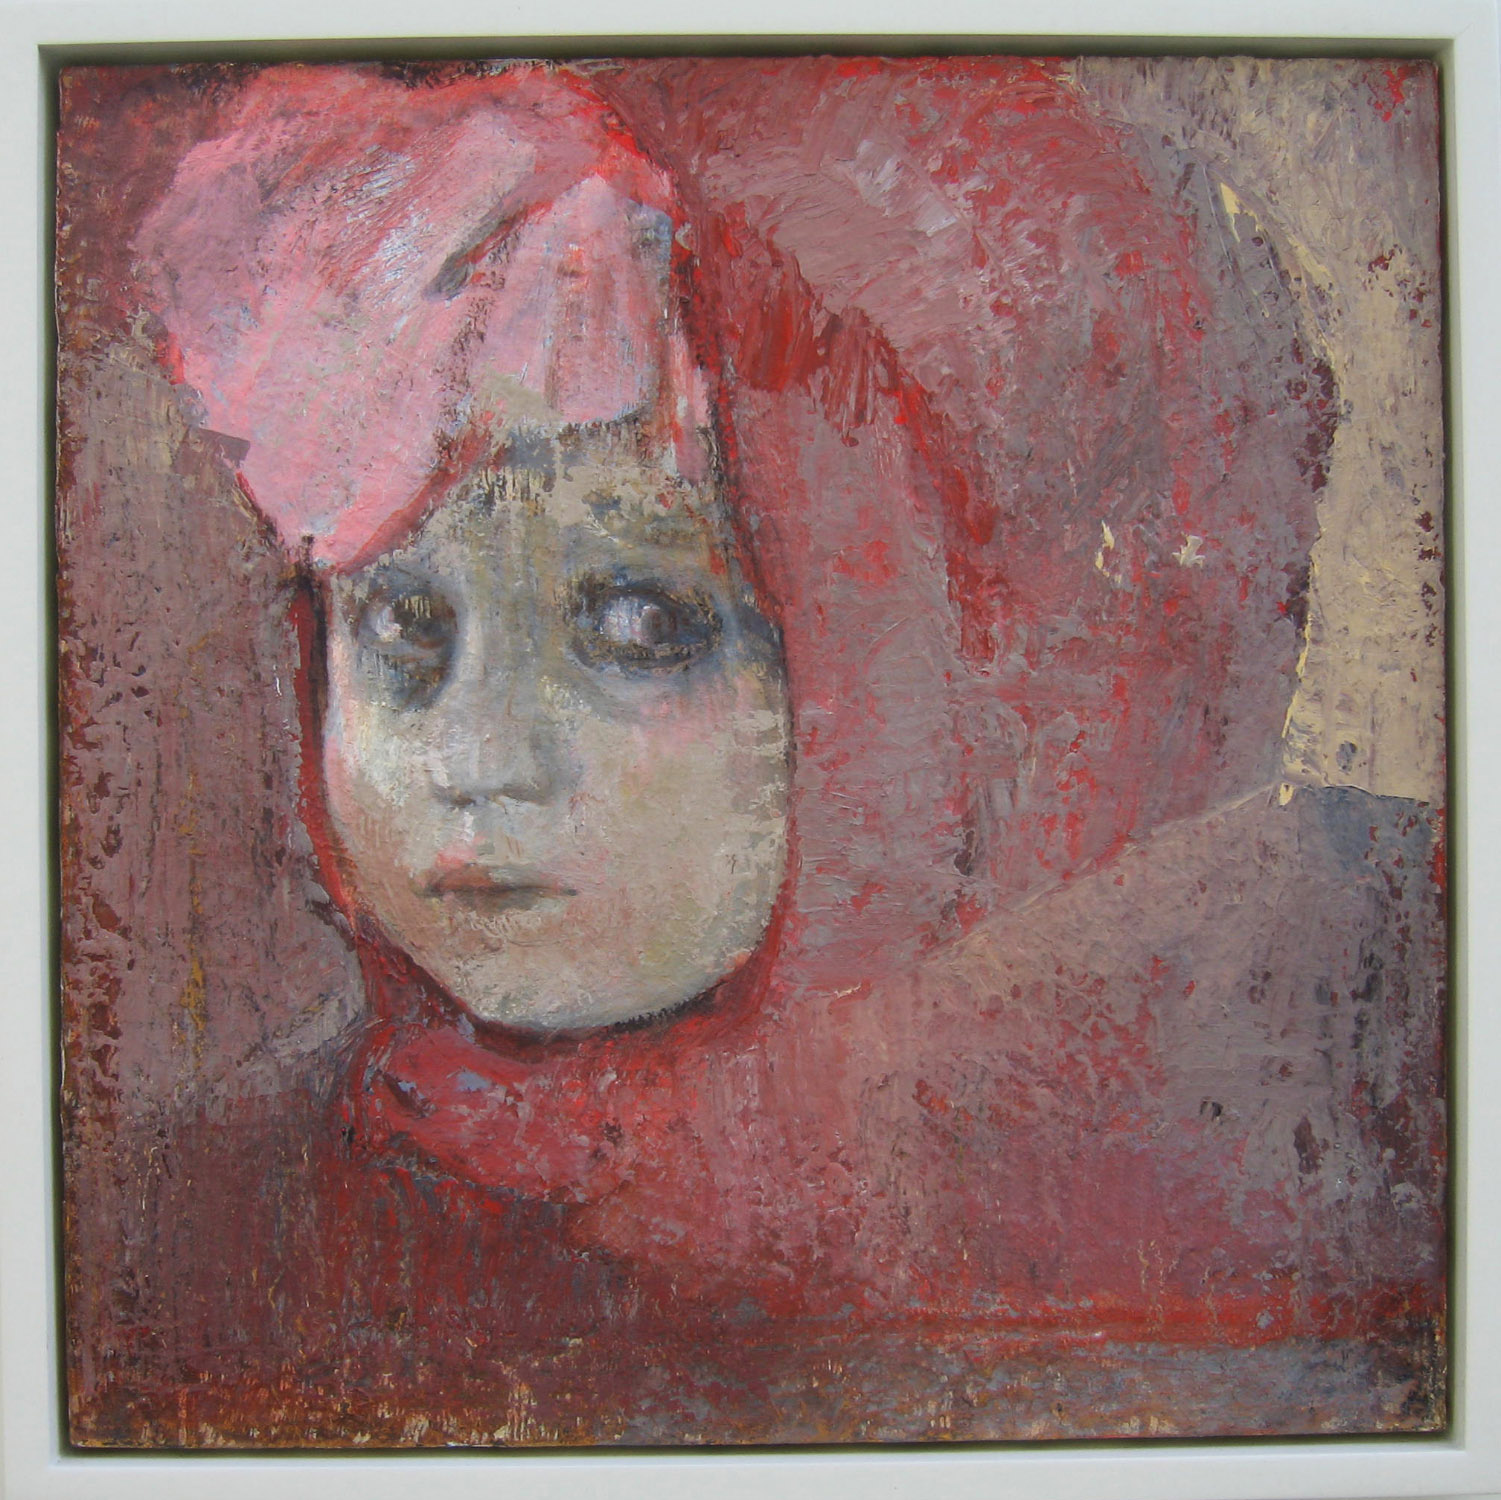 5ba(0) - Gift-Wrapped (Red Hood - oil, resins, wax, on canvas,wood - 22x22 in. 2004).jpg